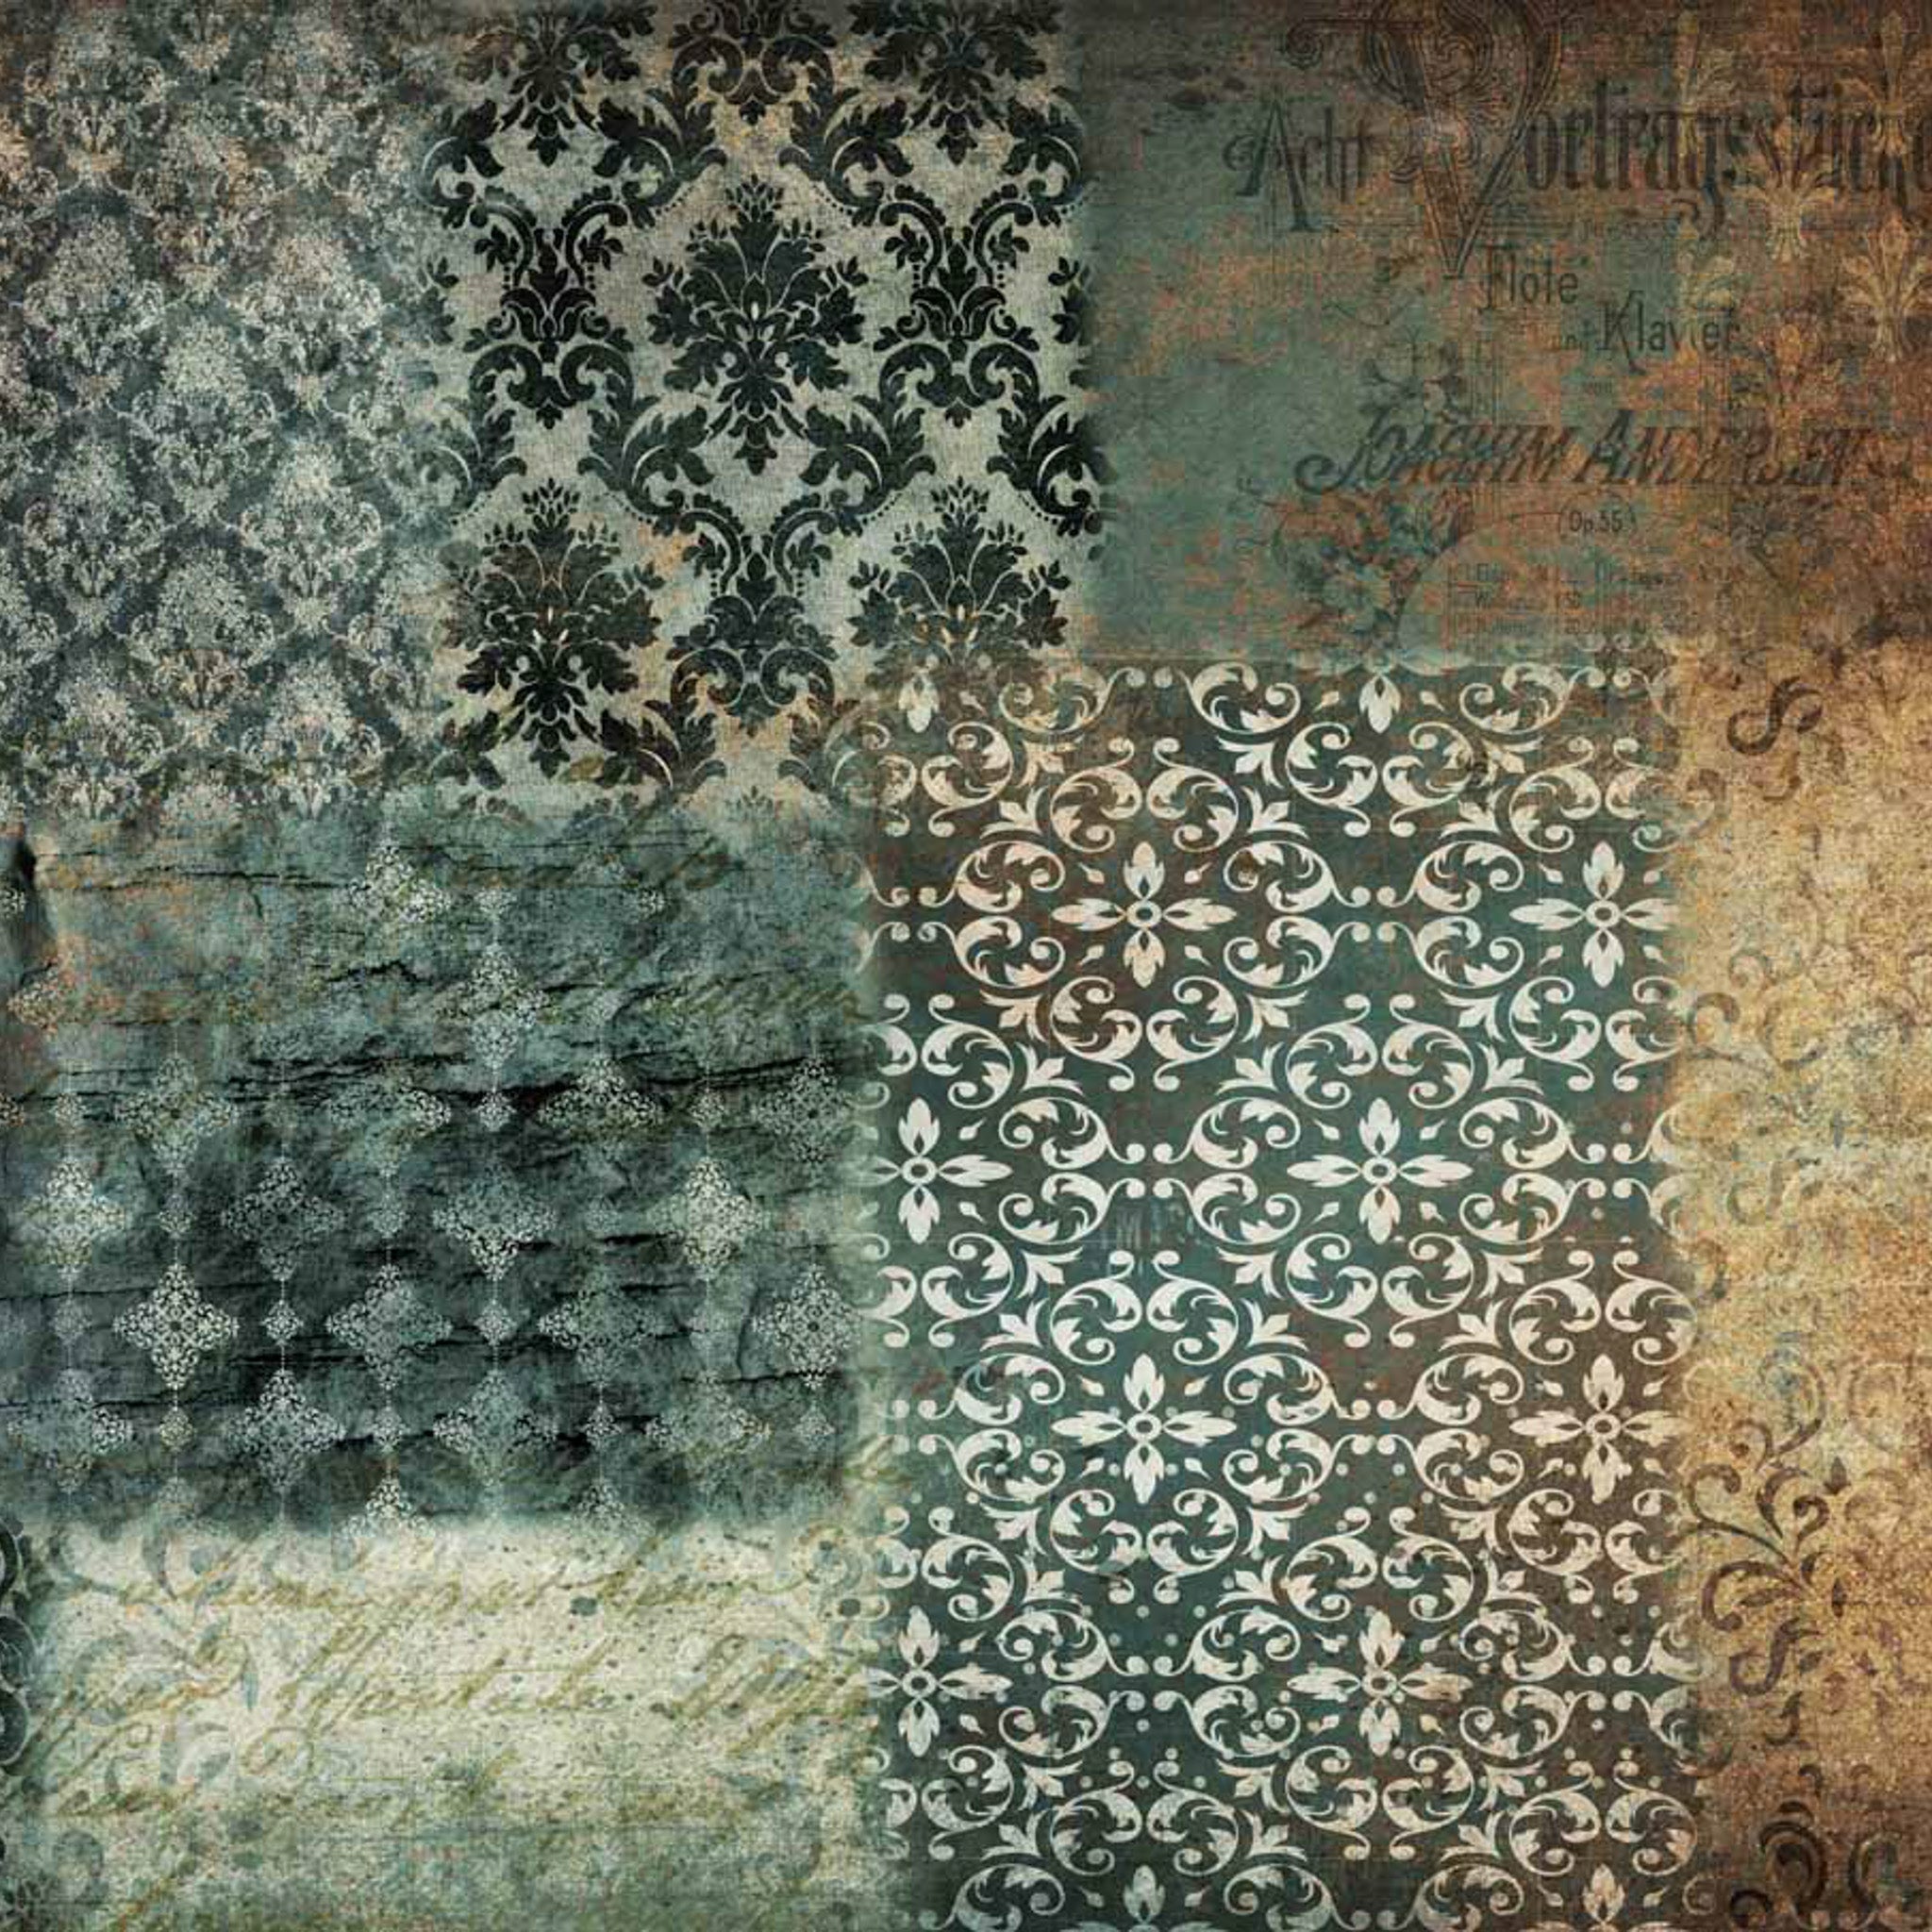 Close-up of an A2 rice paper design that features a beautiful collage of damask designs in rich tones of patina, rust, and sepia.